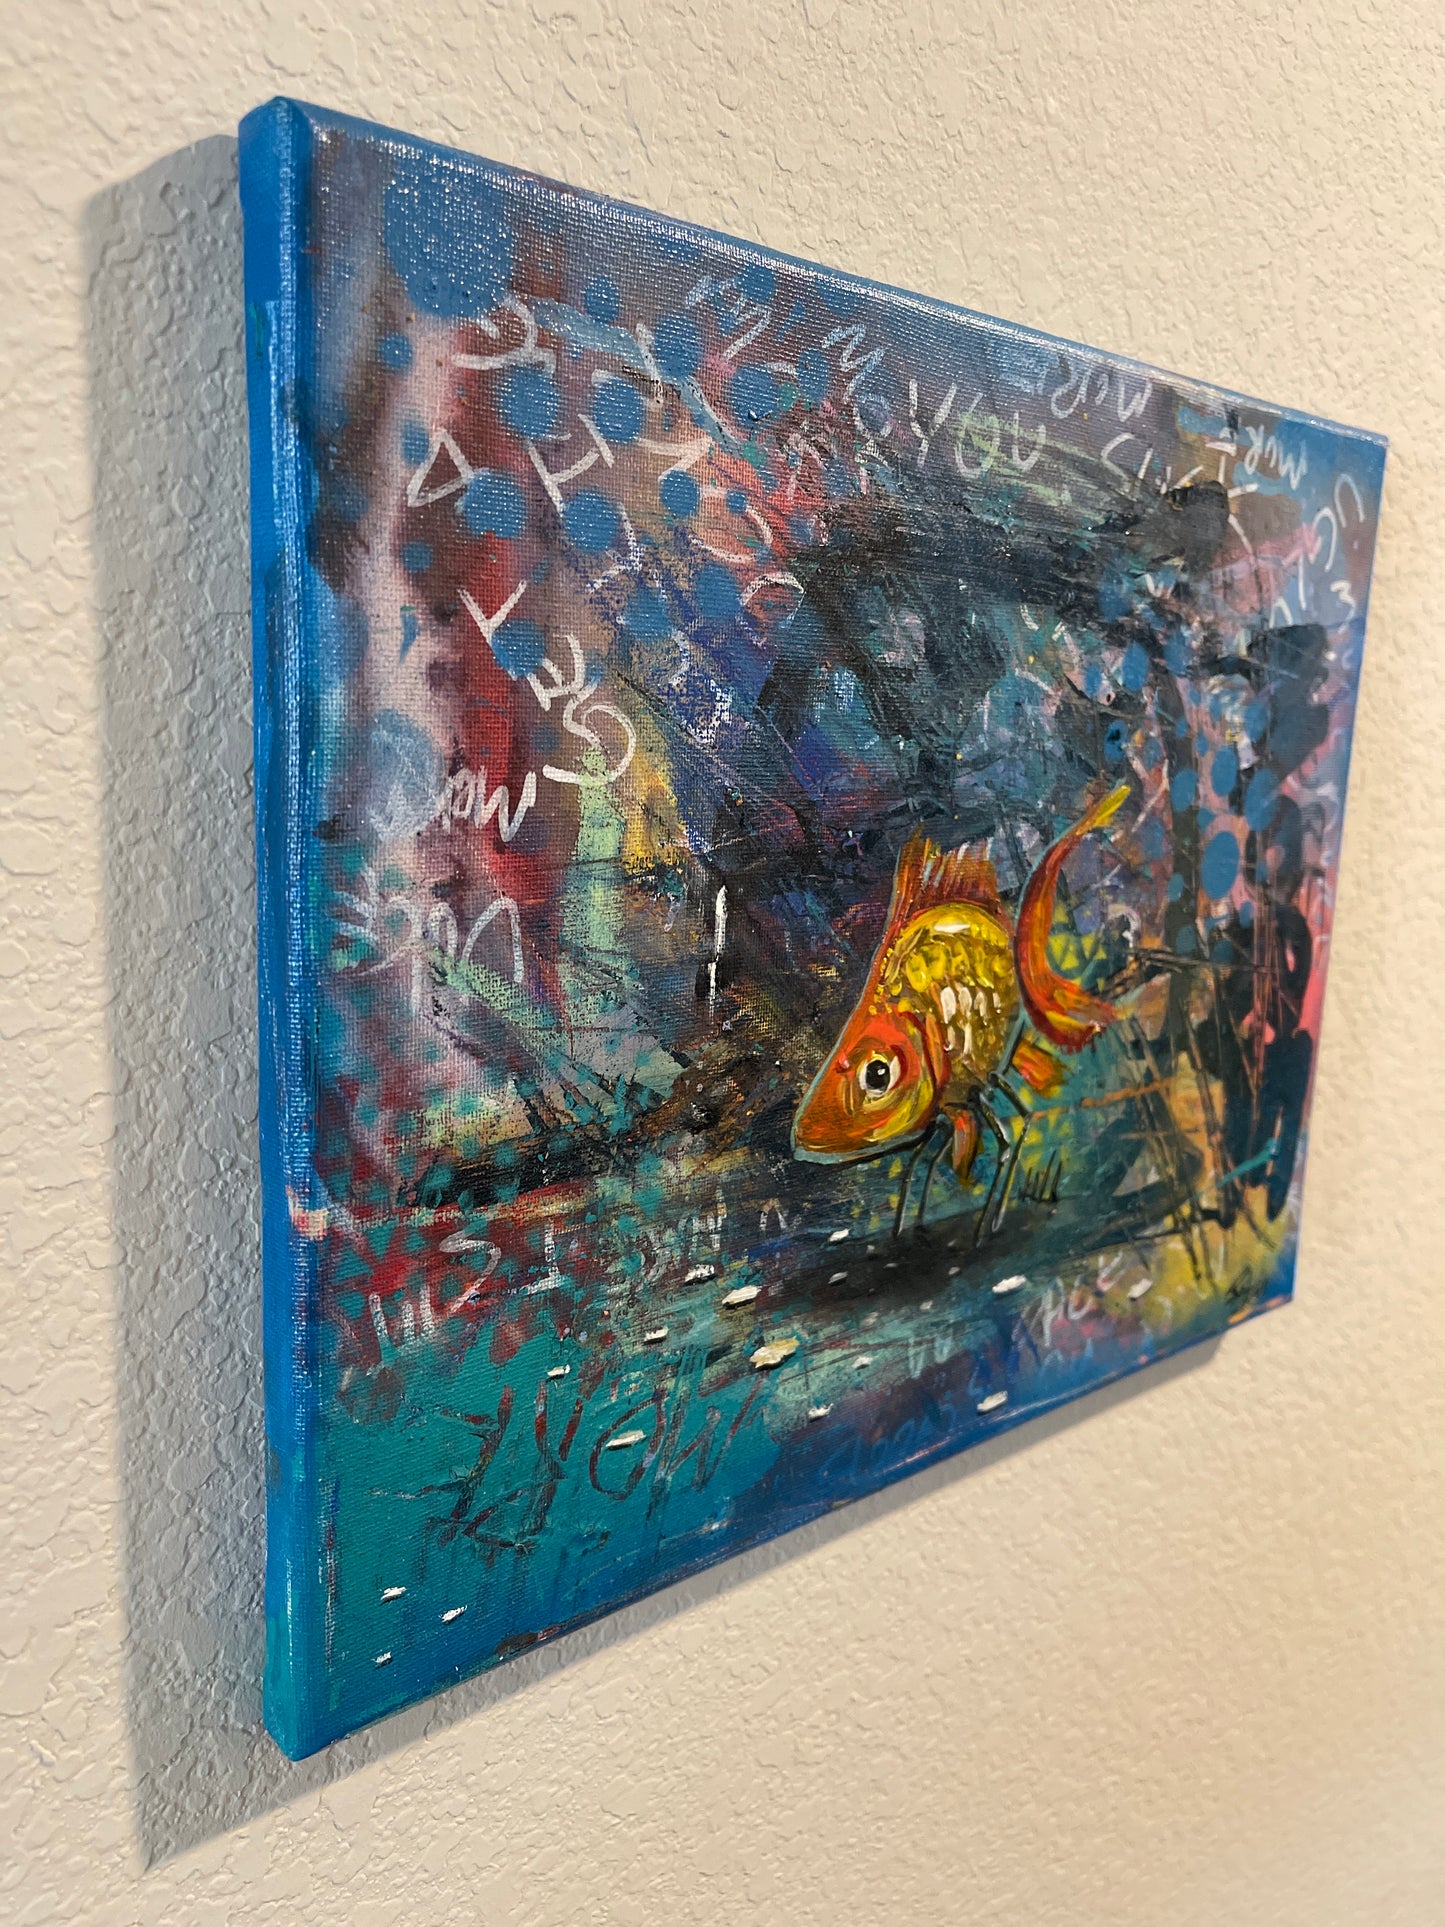 "Loner Robot Fish" Small Mixed Media Painting on 11in by 14in by 2in stretched canvas.